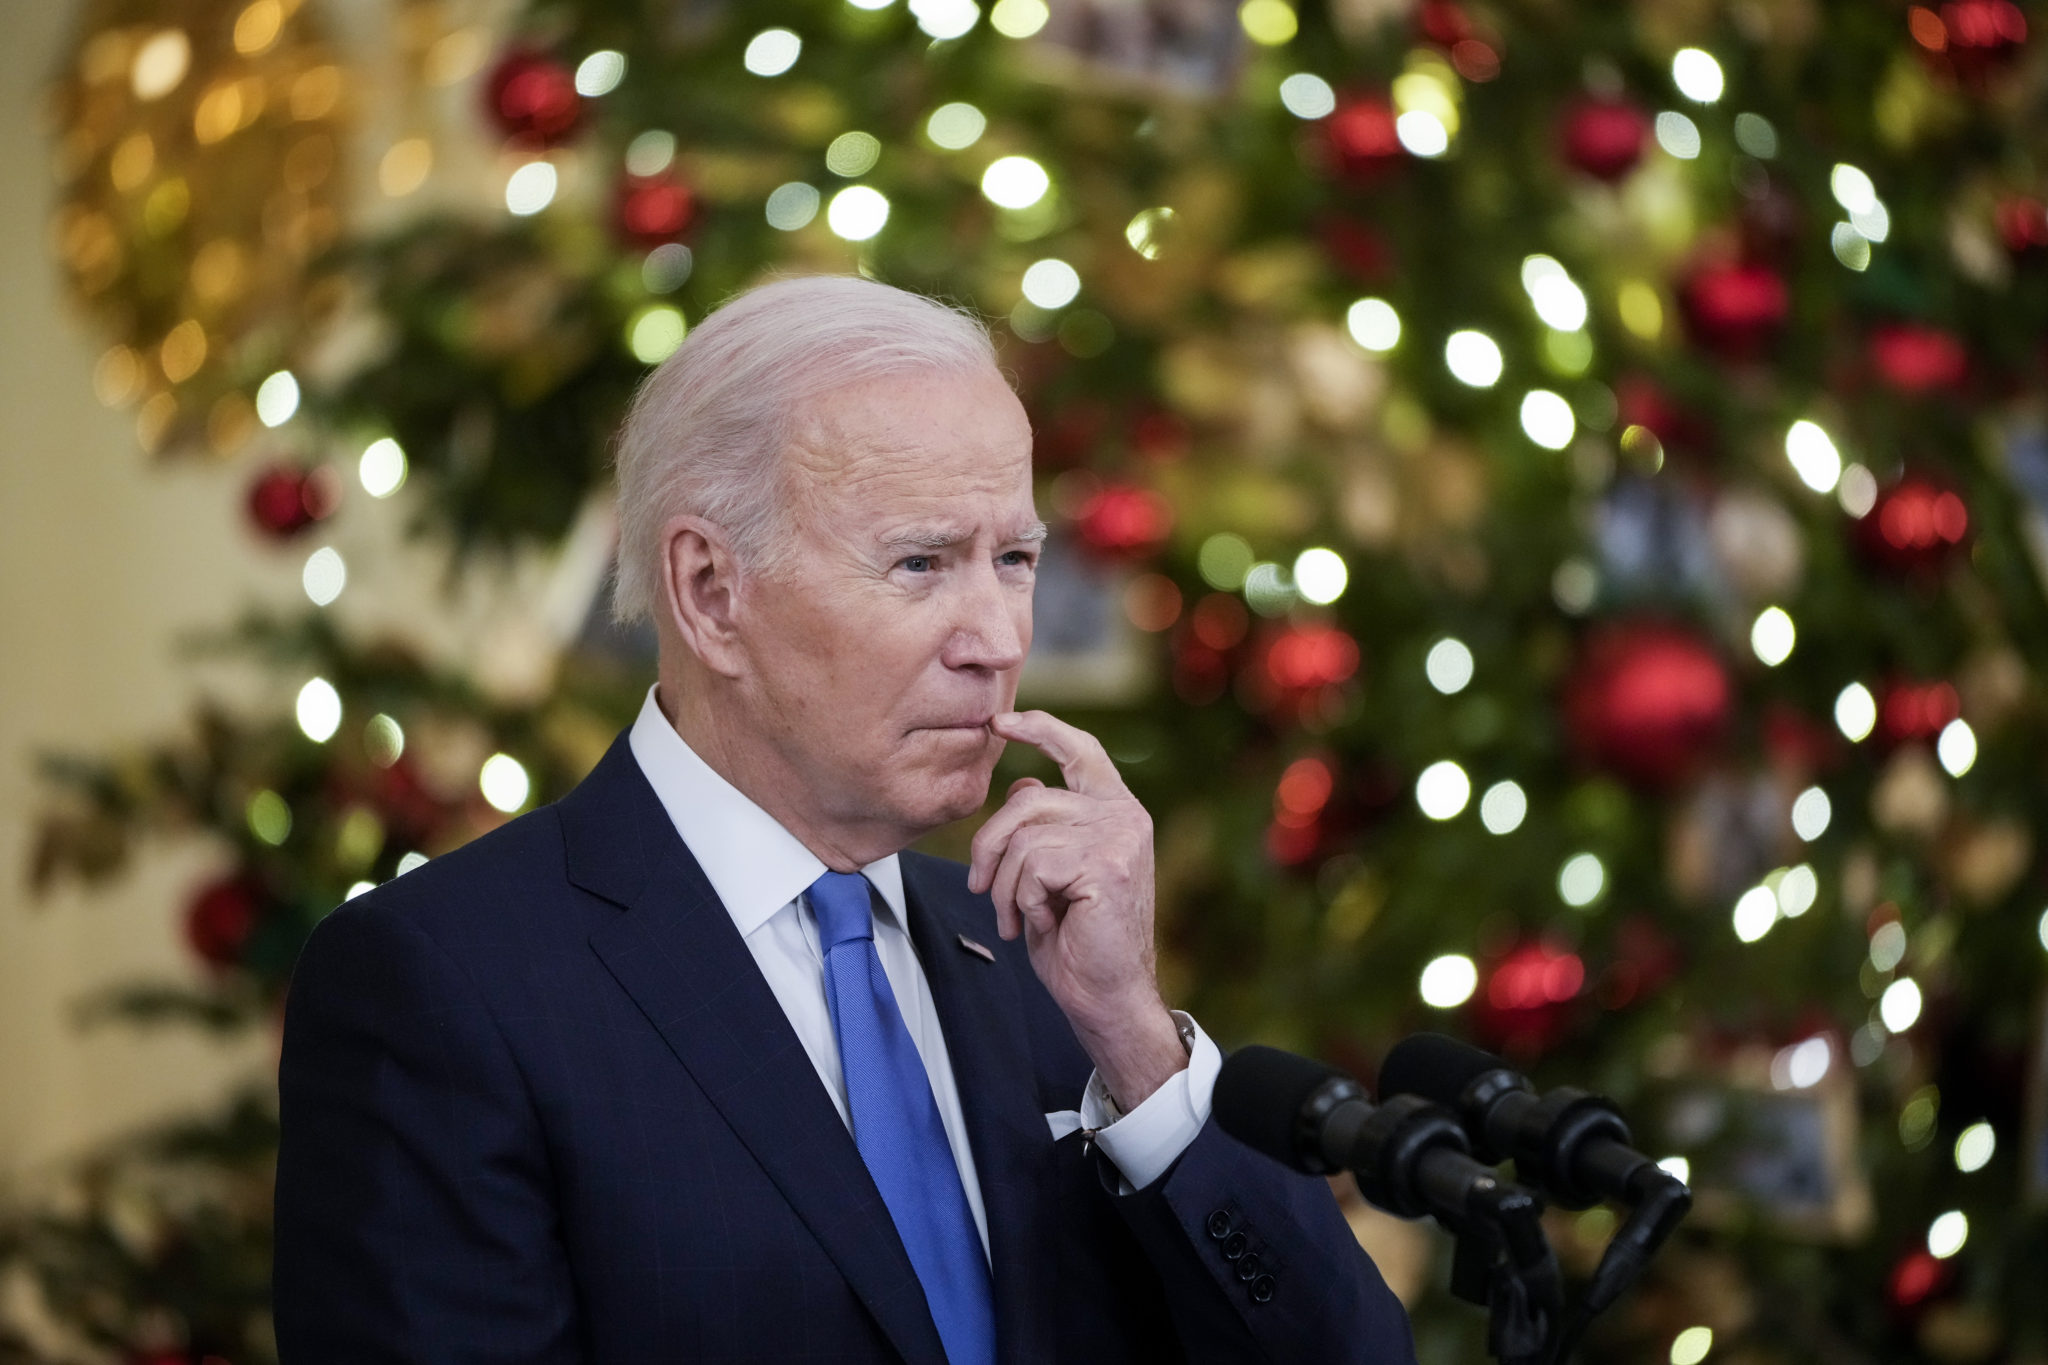 President Biden Delivers Remarks On Fight Against Covid-19